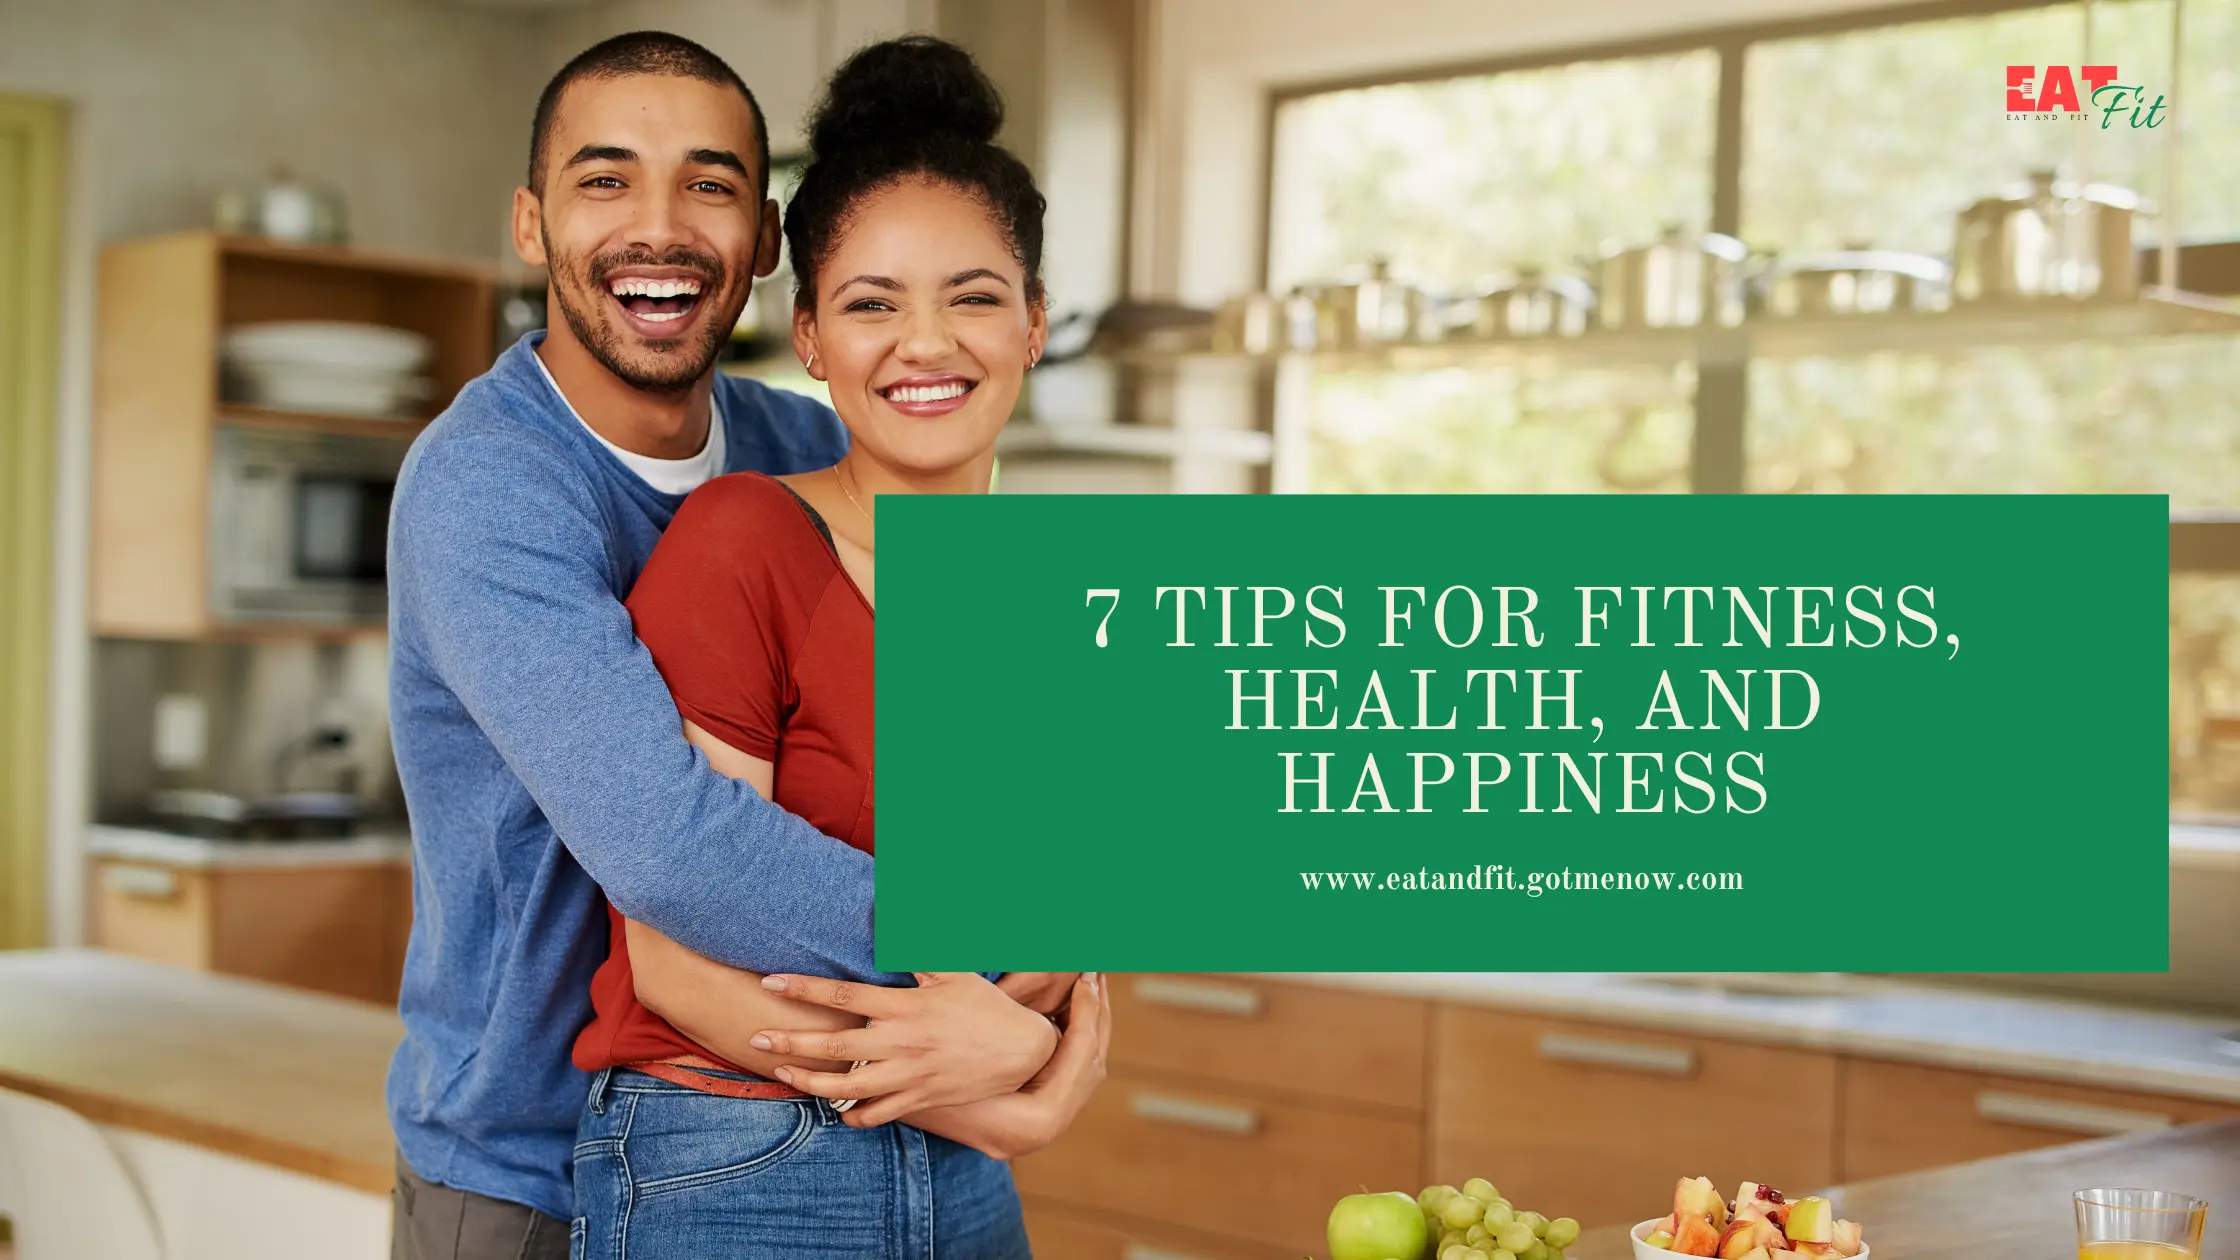 Seven Ways to Stay Fit, Healthy, and Contented